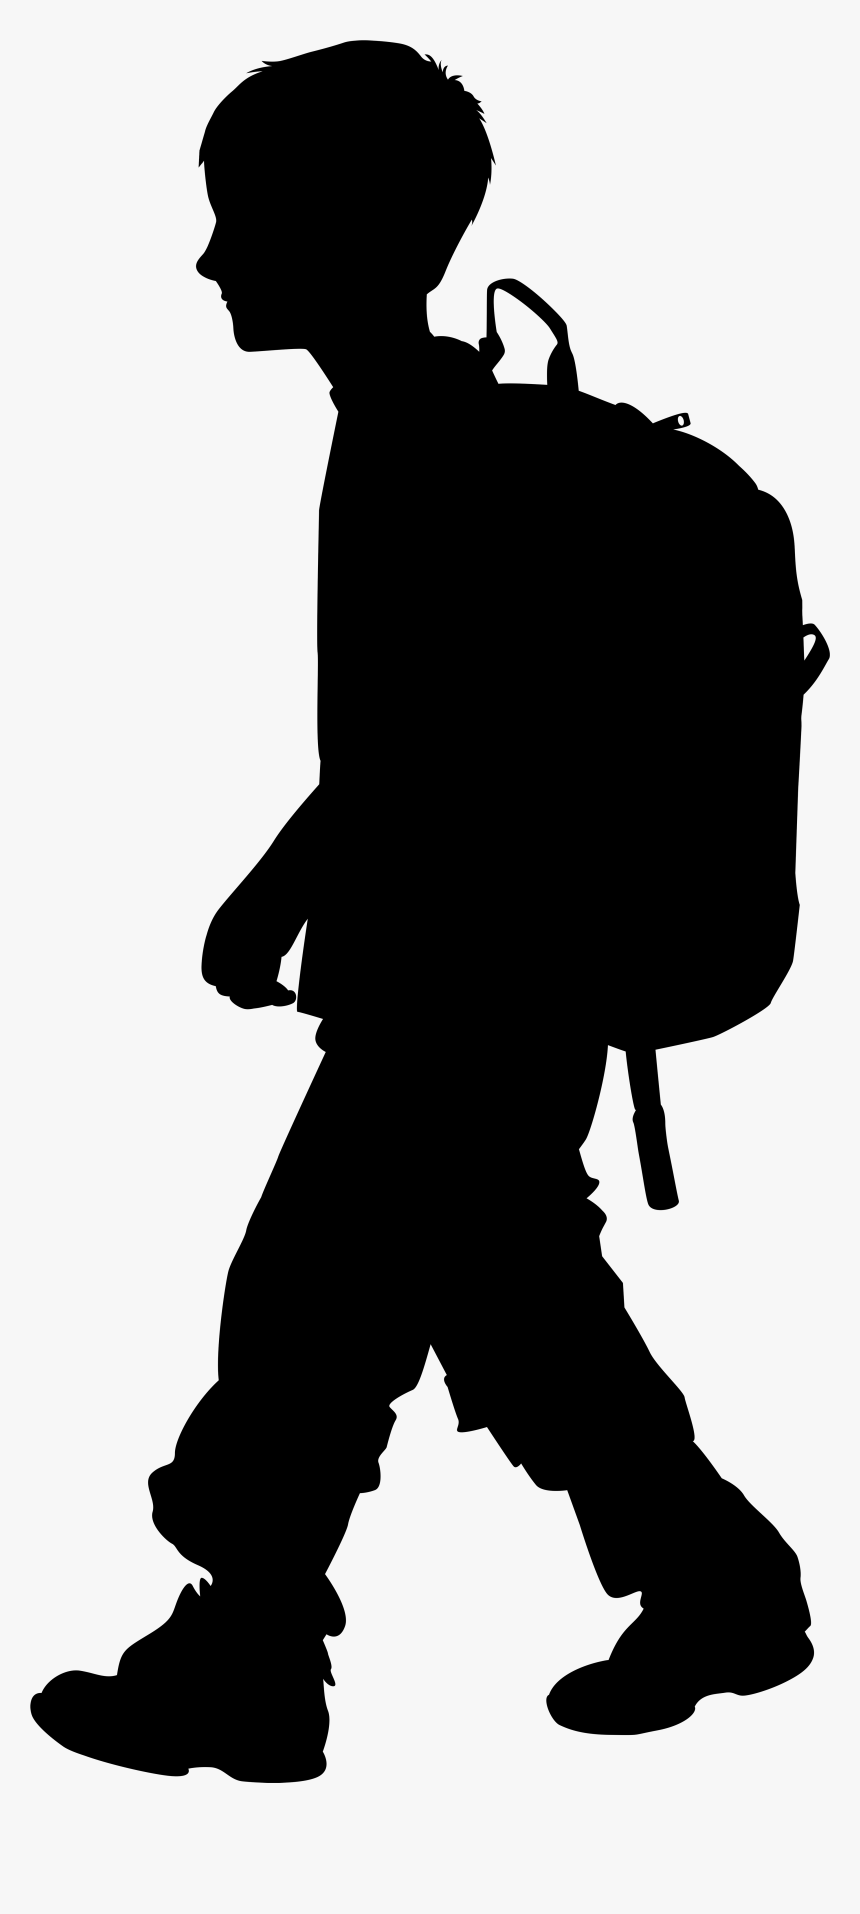 Image Download With Backpack Png Clip Art Image Gallery - Boy Silhouette Png, Transparent Png, Free Download